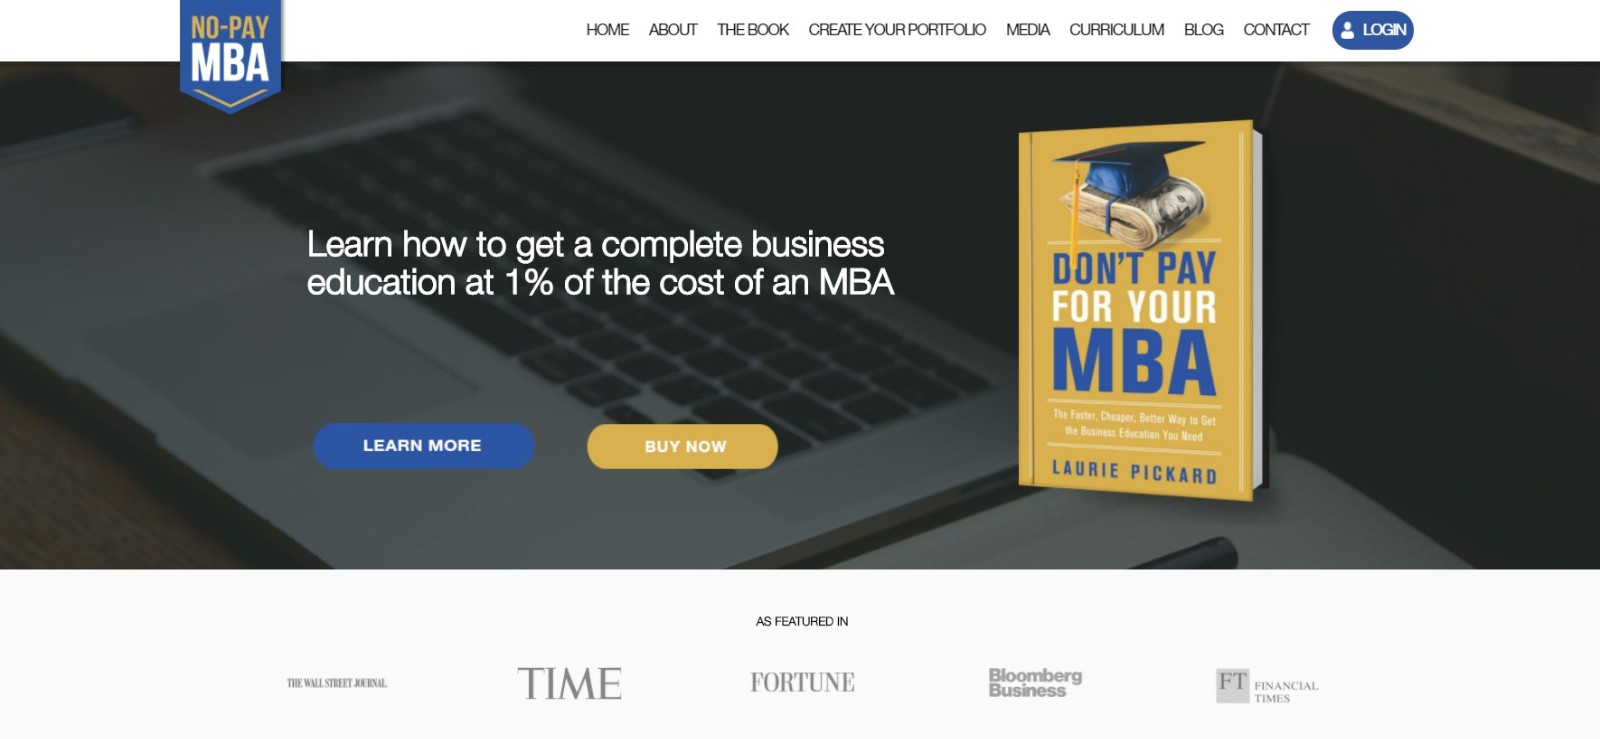 No-pay MBA